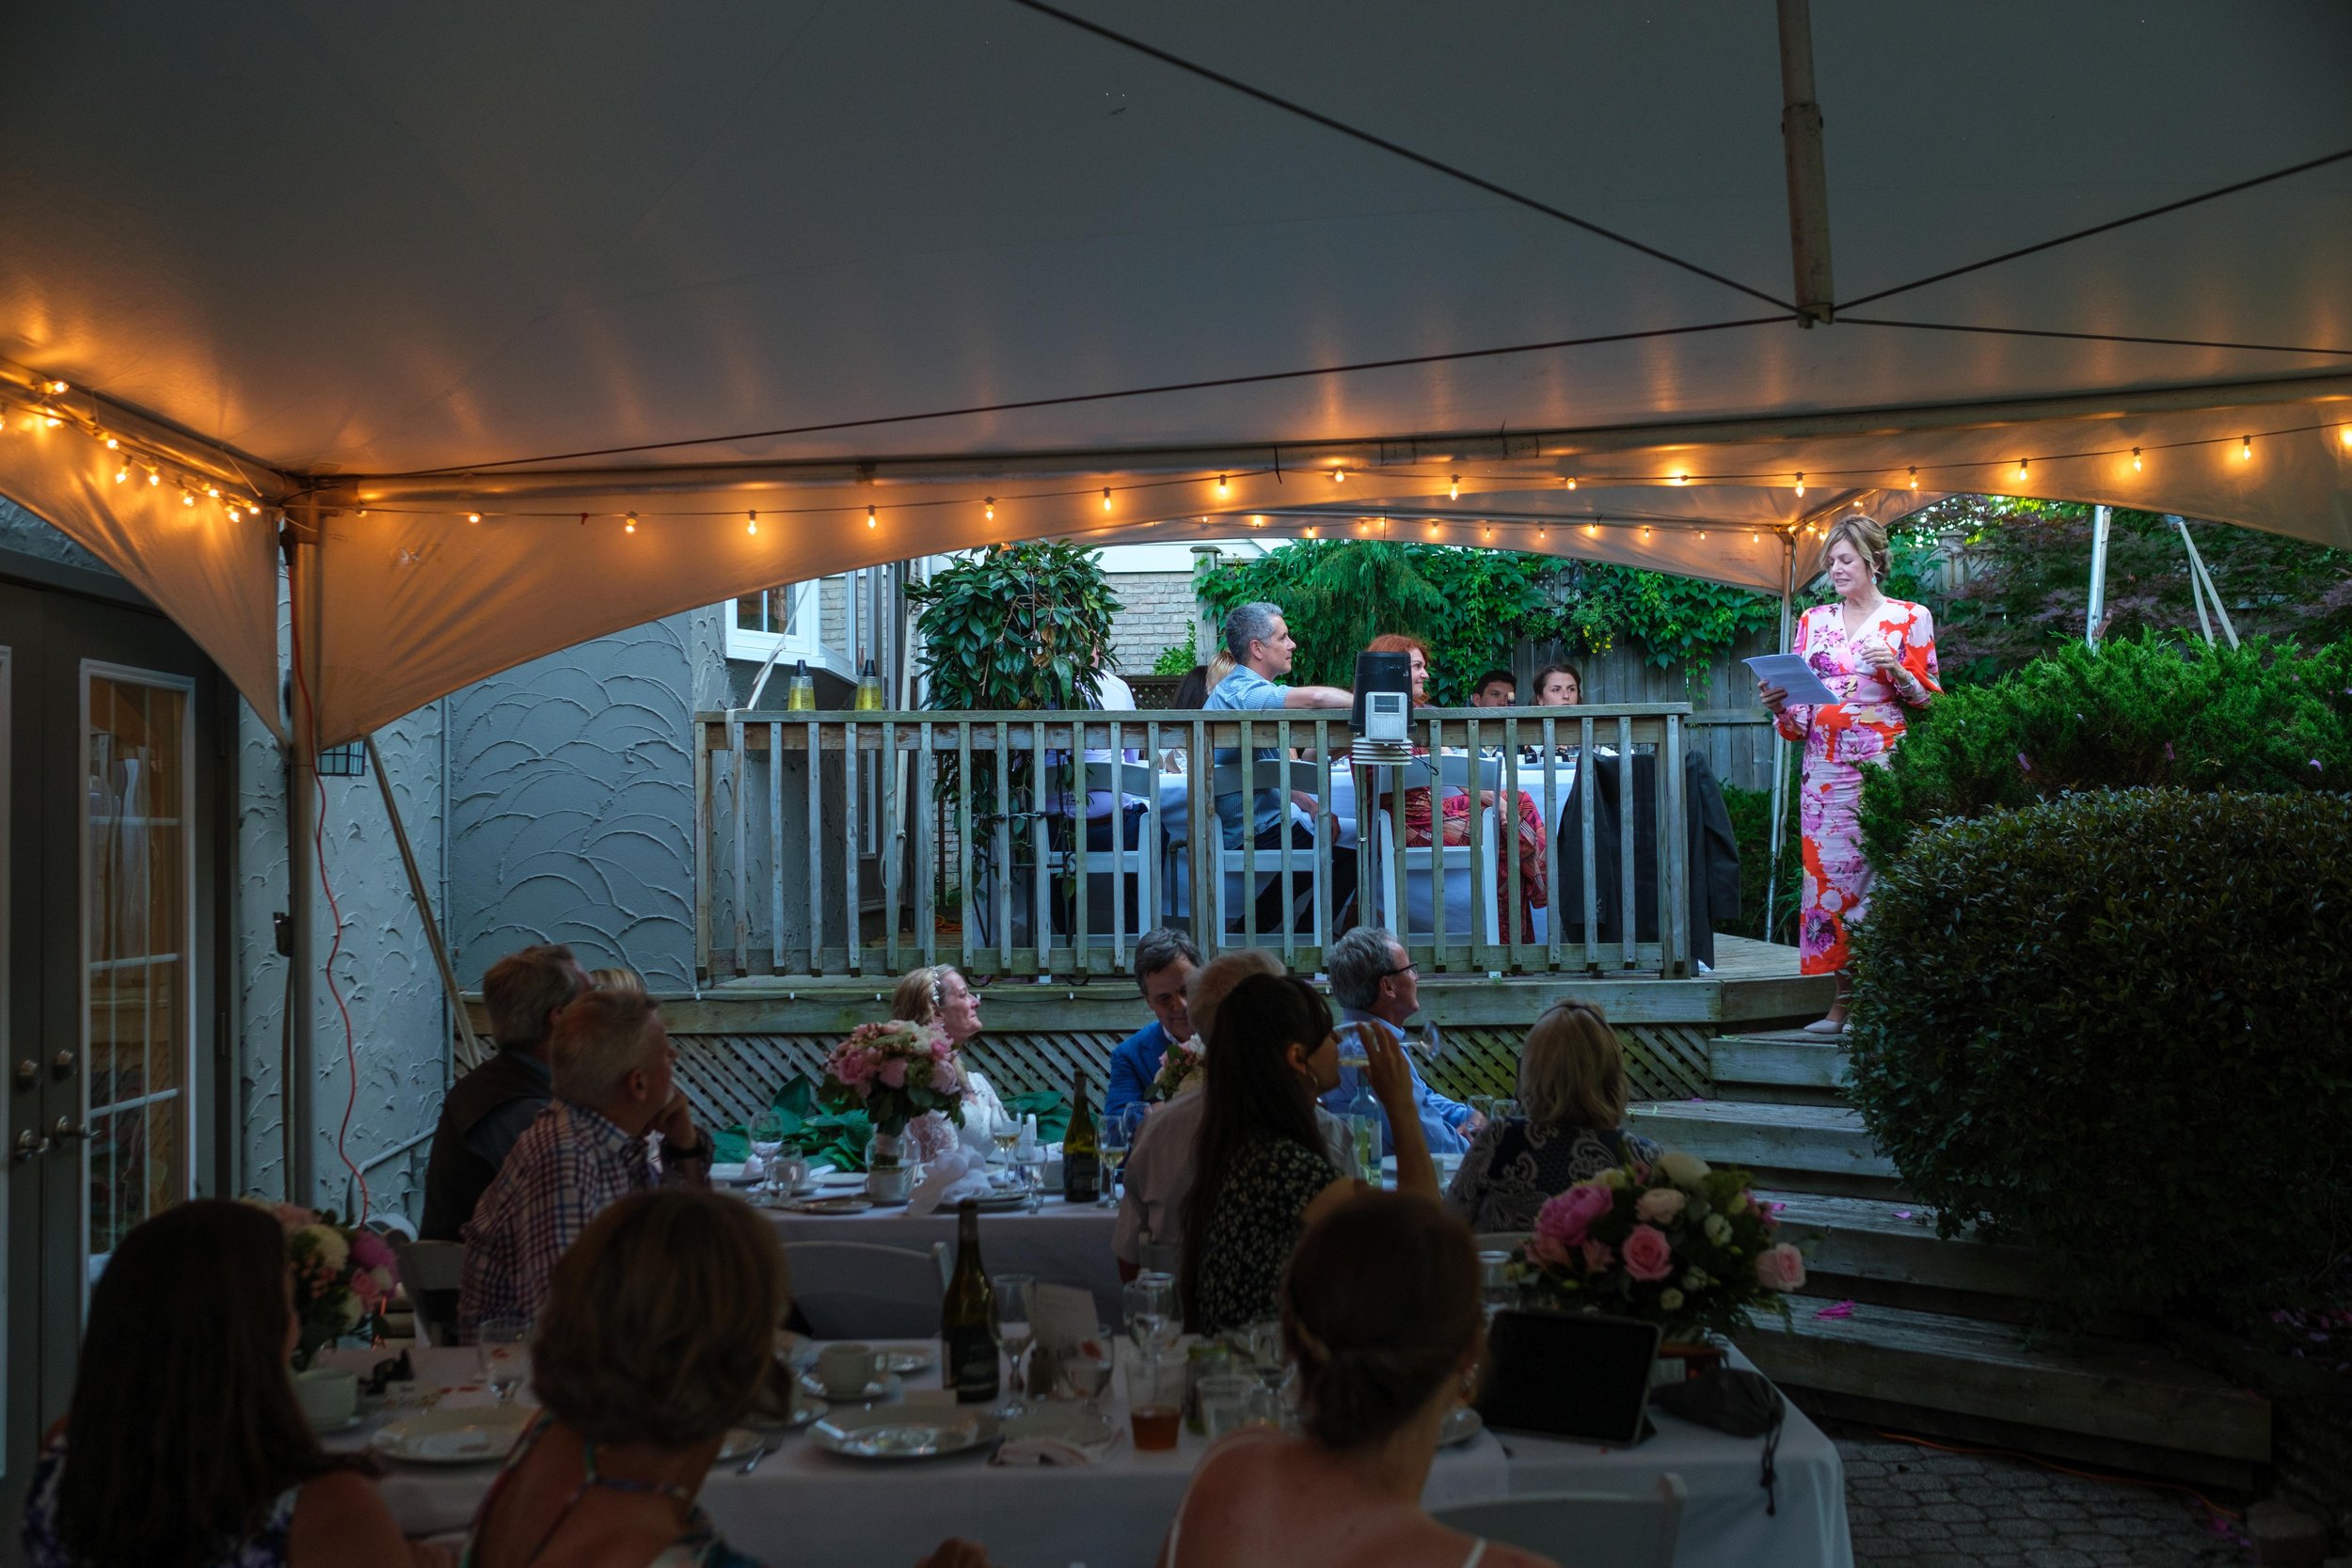  A colour candid wedding photograph from Katherine + Cameron’s dinner reception during their backyard wedding in Waterloo, Ontario by Toronto wedding photographer Scott Williams (www.scottwilliamsphotographer.com) 